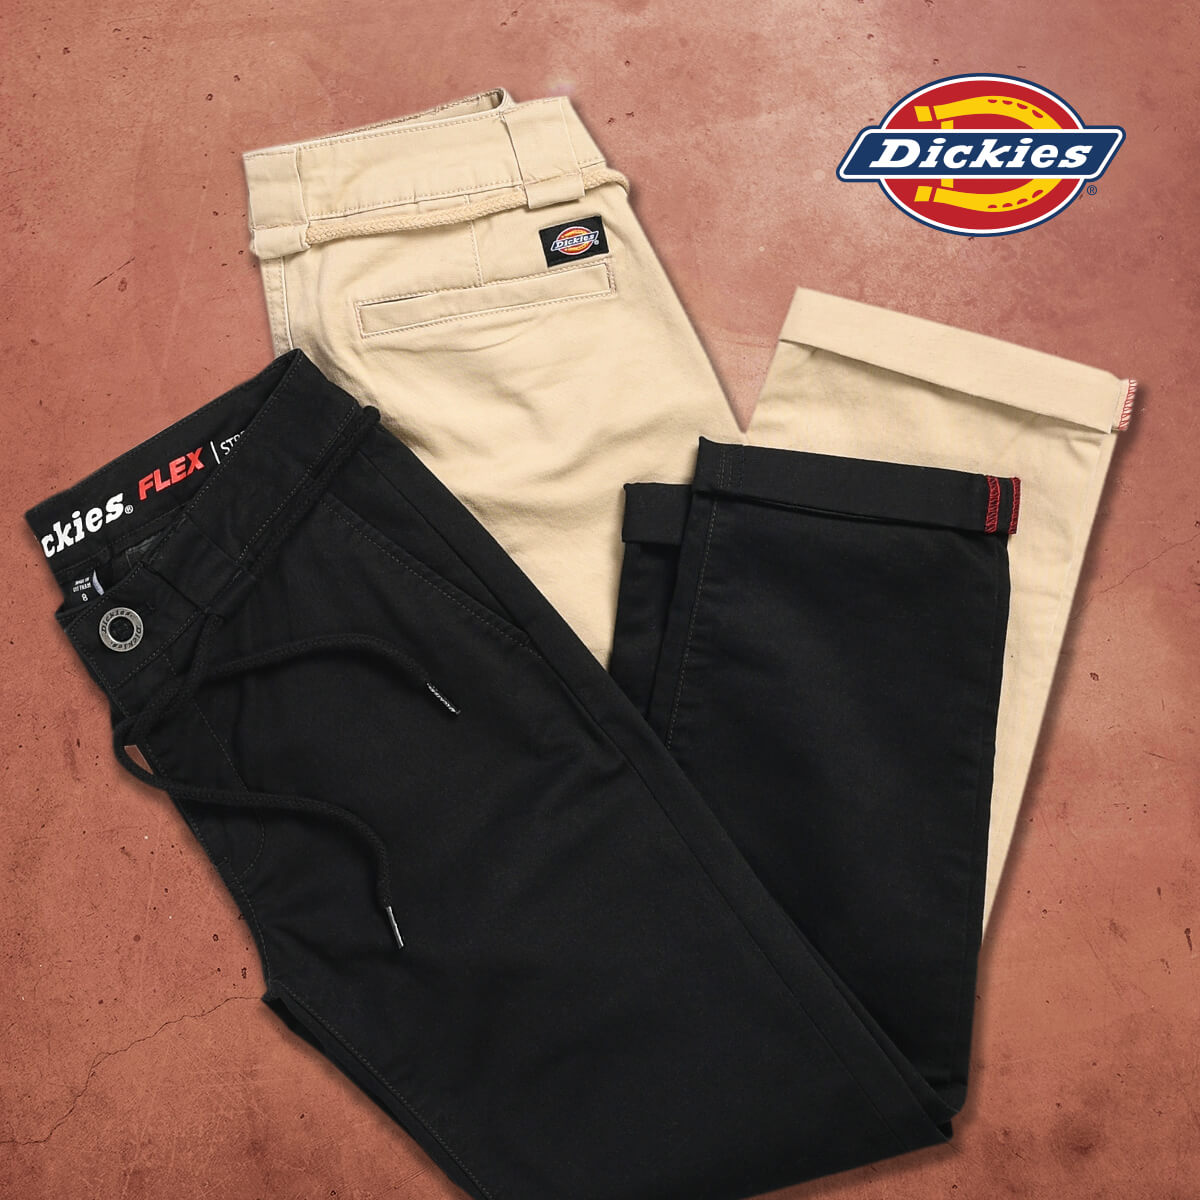 NEW PANTS FROM DICKIES & MORE - SHOP PANTS